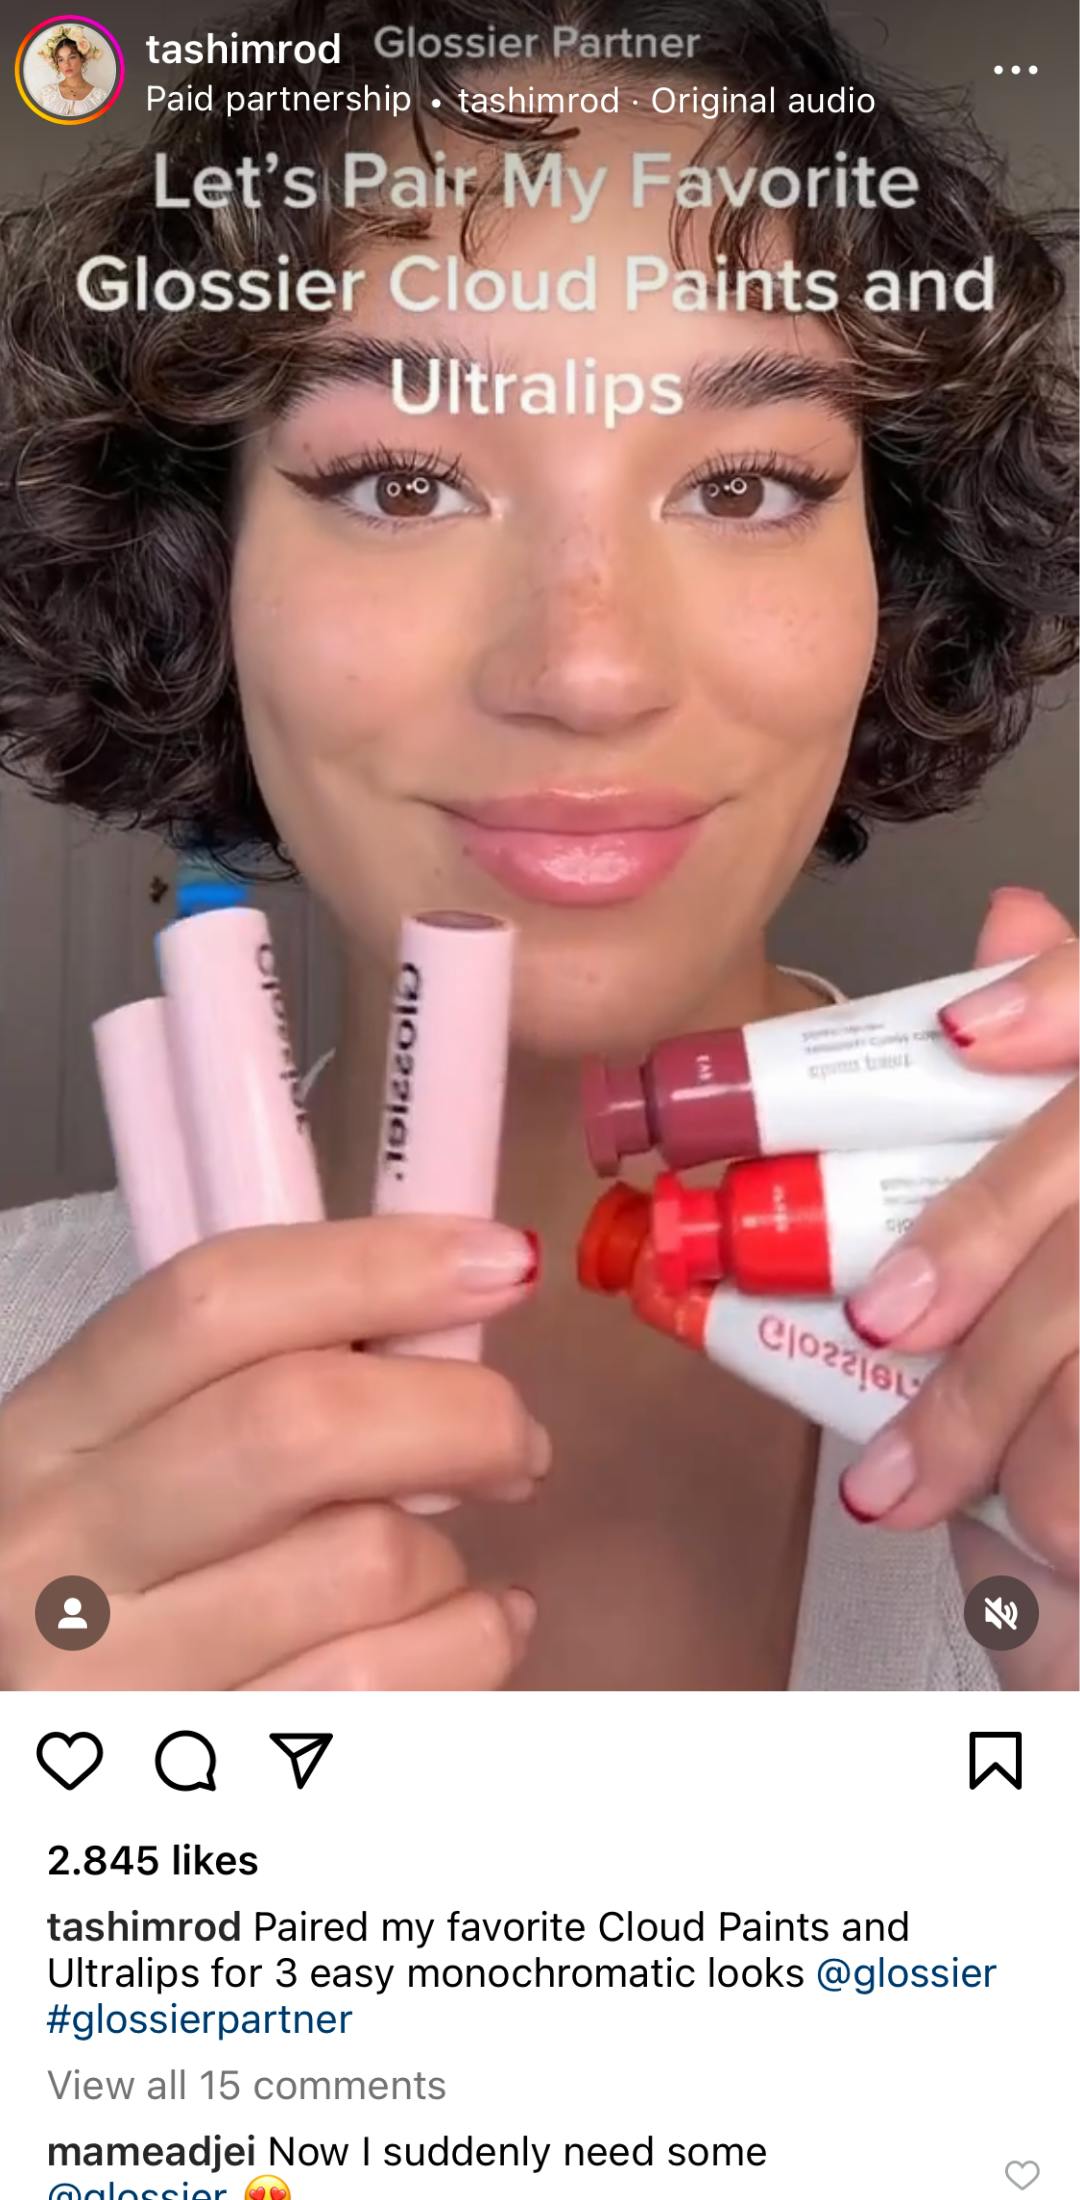 Screenshot of @tashimrod's sponsored post featuring Glossier products.